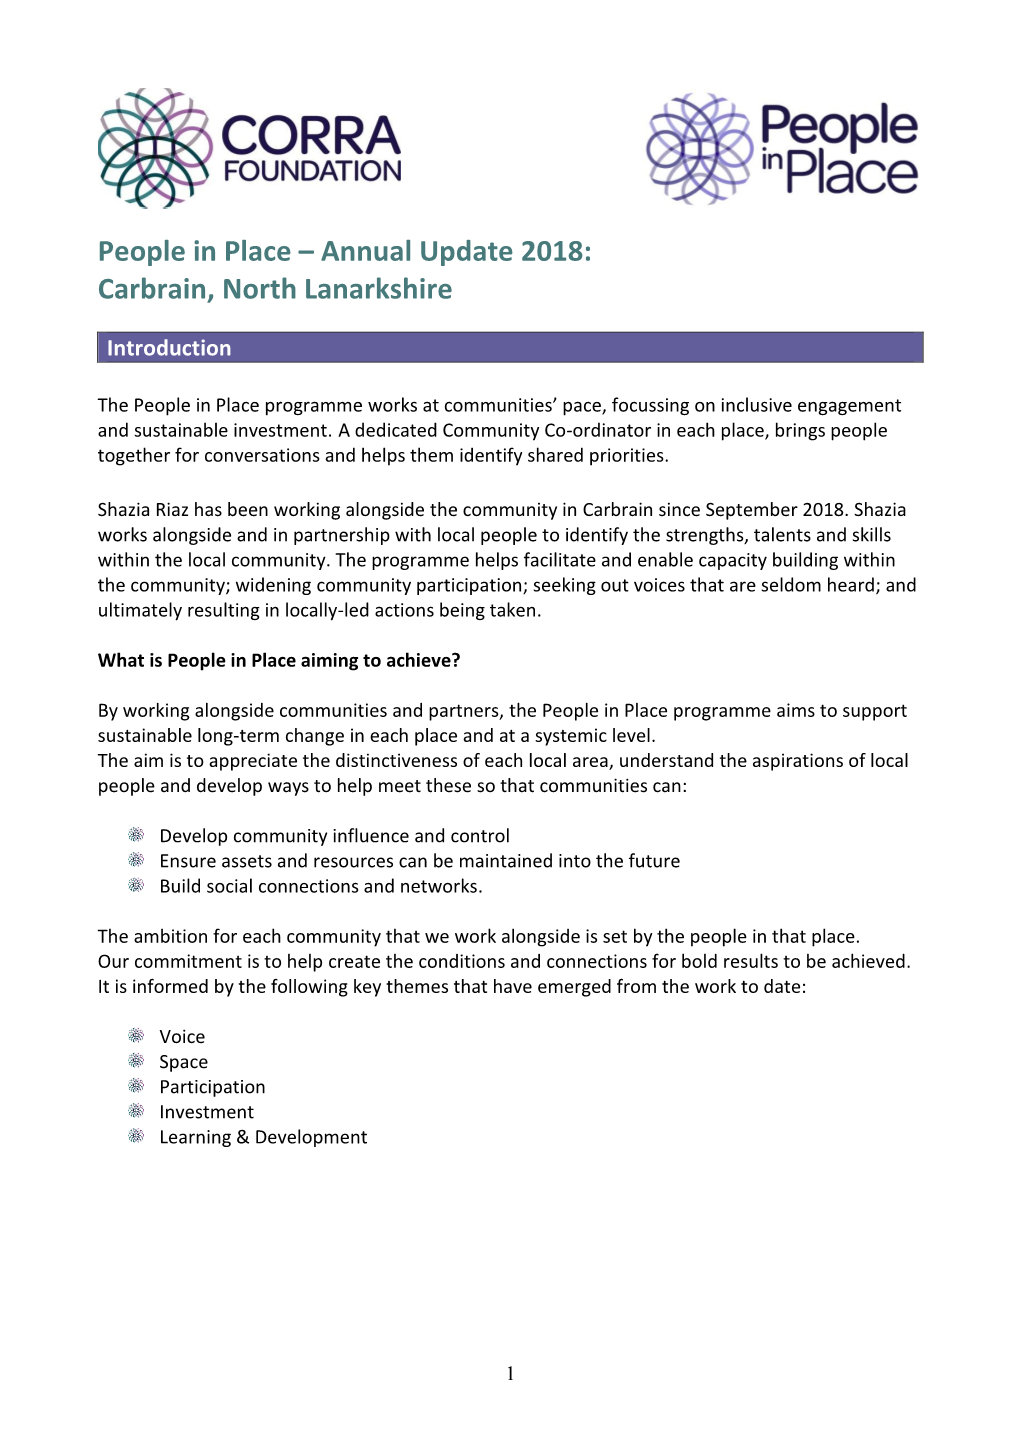 People in Place – Annual Update 2018: Carbrain, North Lanarkshire